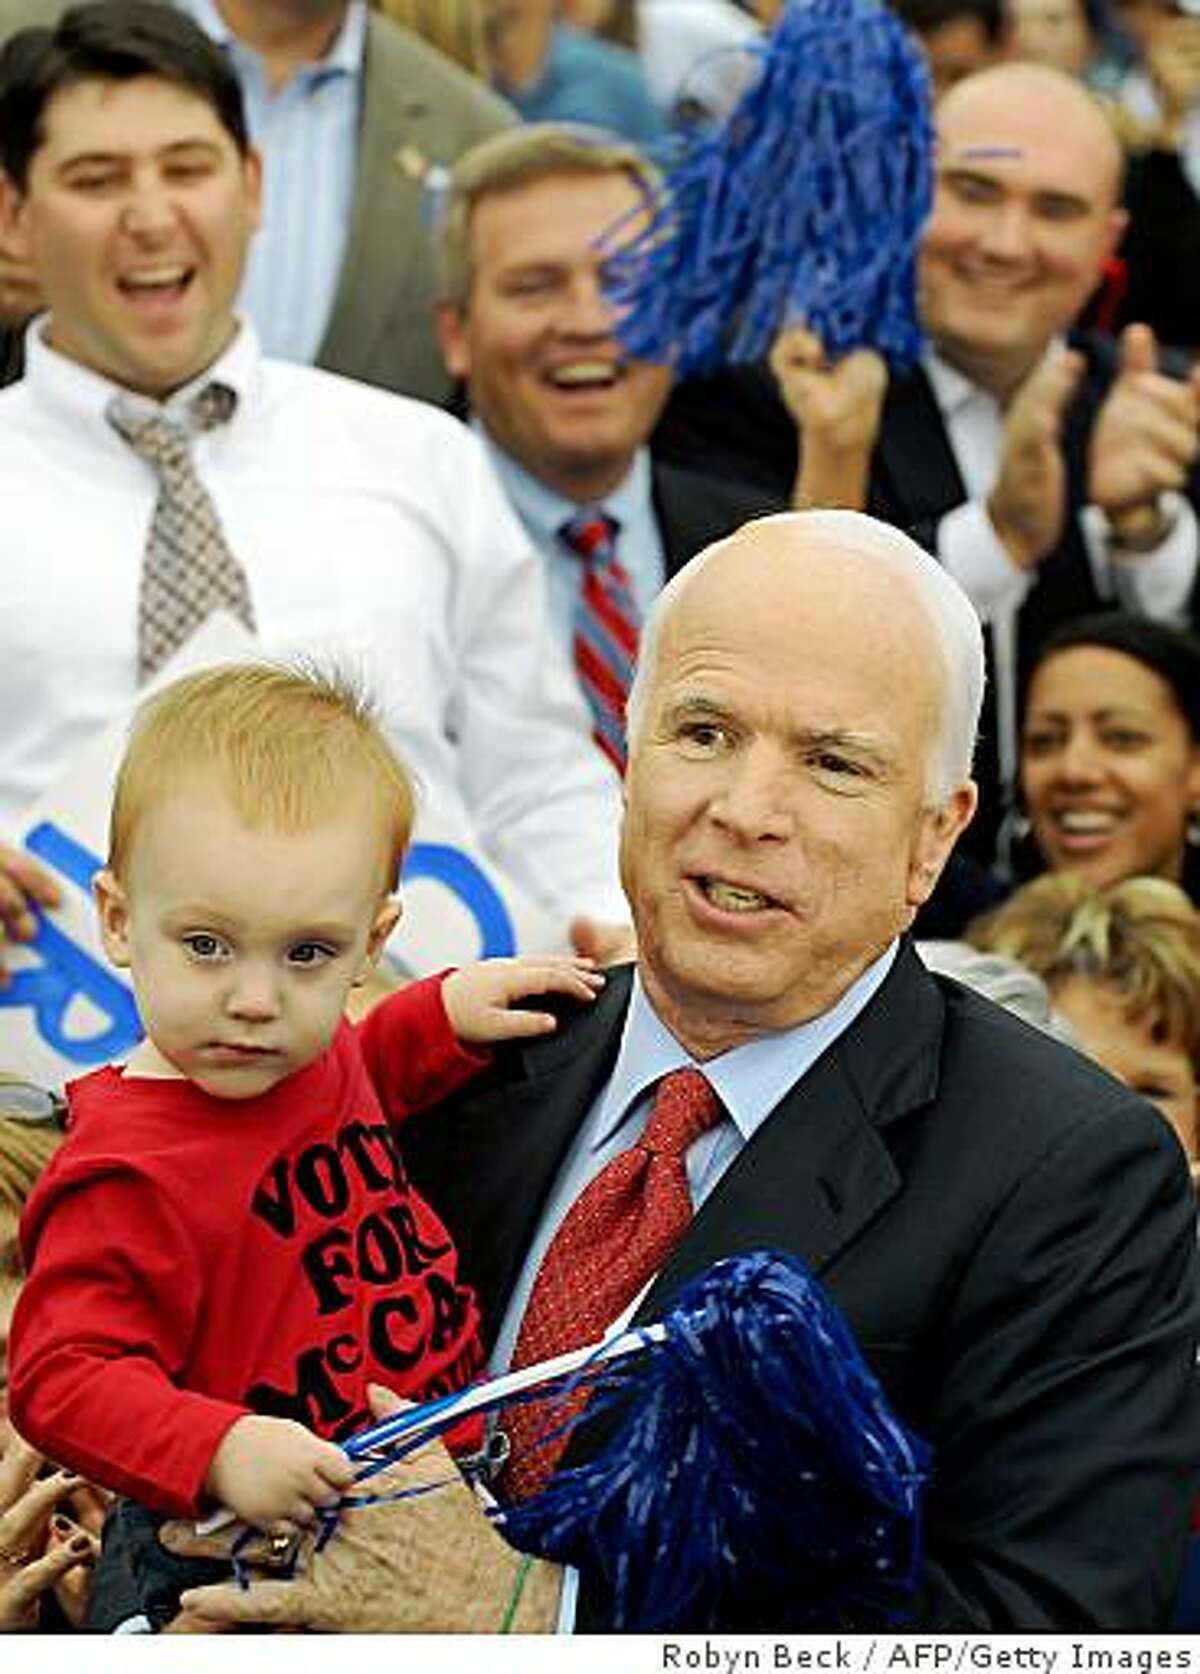 Republican presidential candidate John McCain holds a small child during a campaign rally at the Heartland High School & Academy in Belton, Missouri on October 20, 2008. AFP PHOTO Robyn BECK (Photo credit should read ROBYN BECK/AFP/Getty Images)